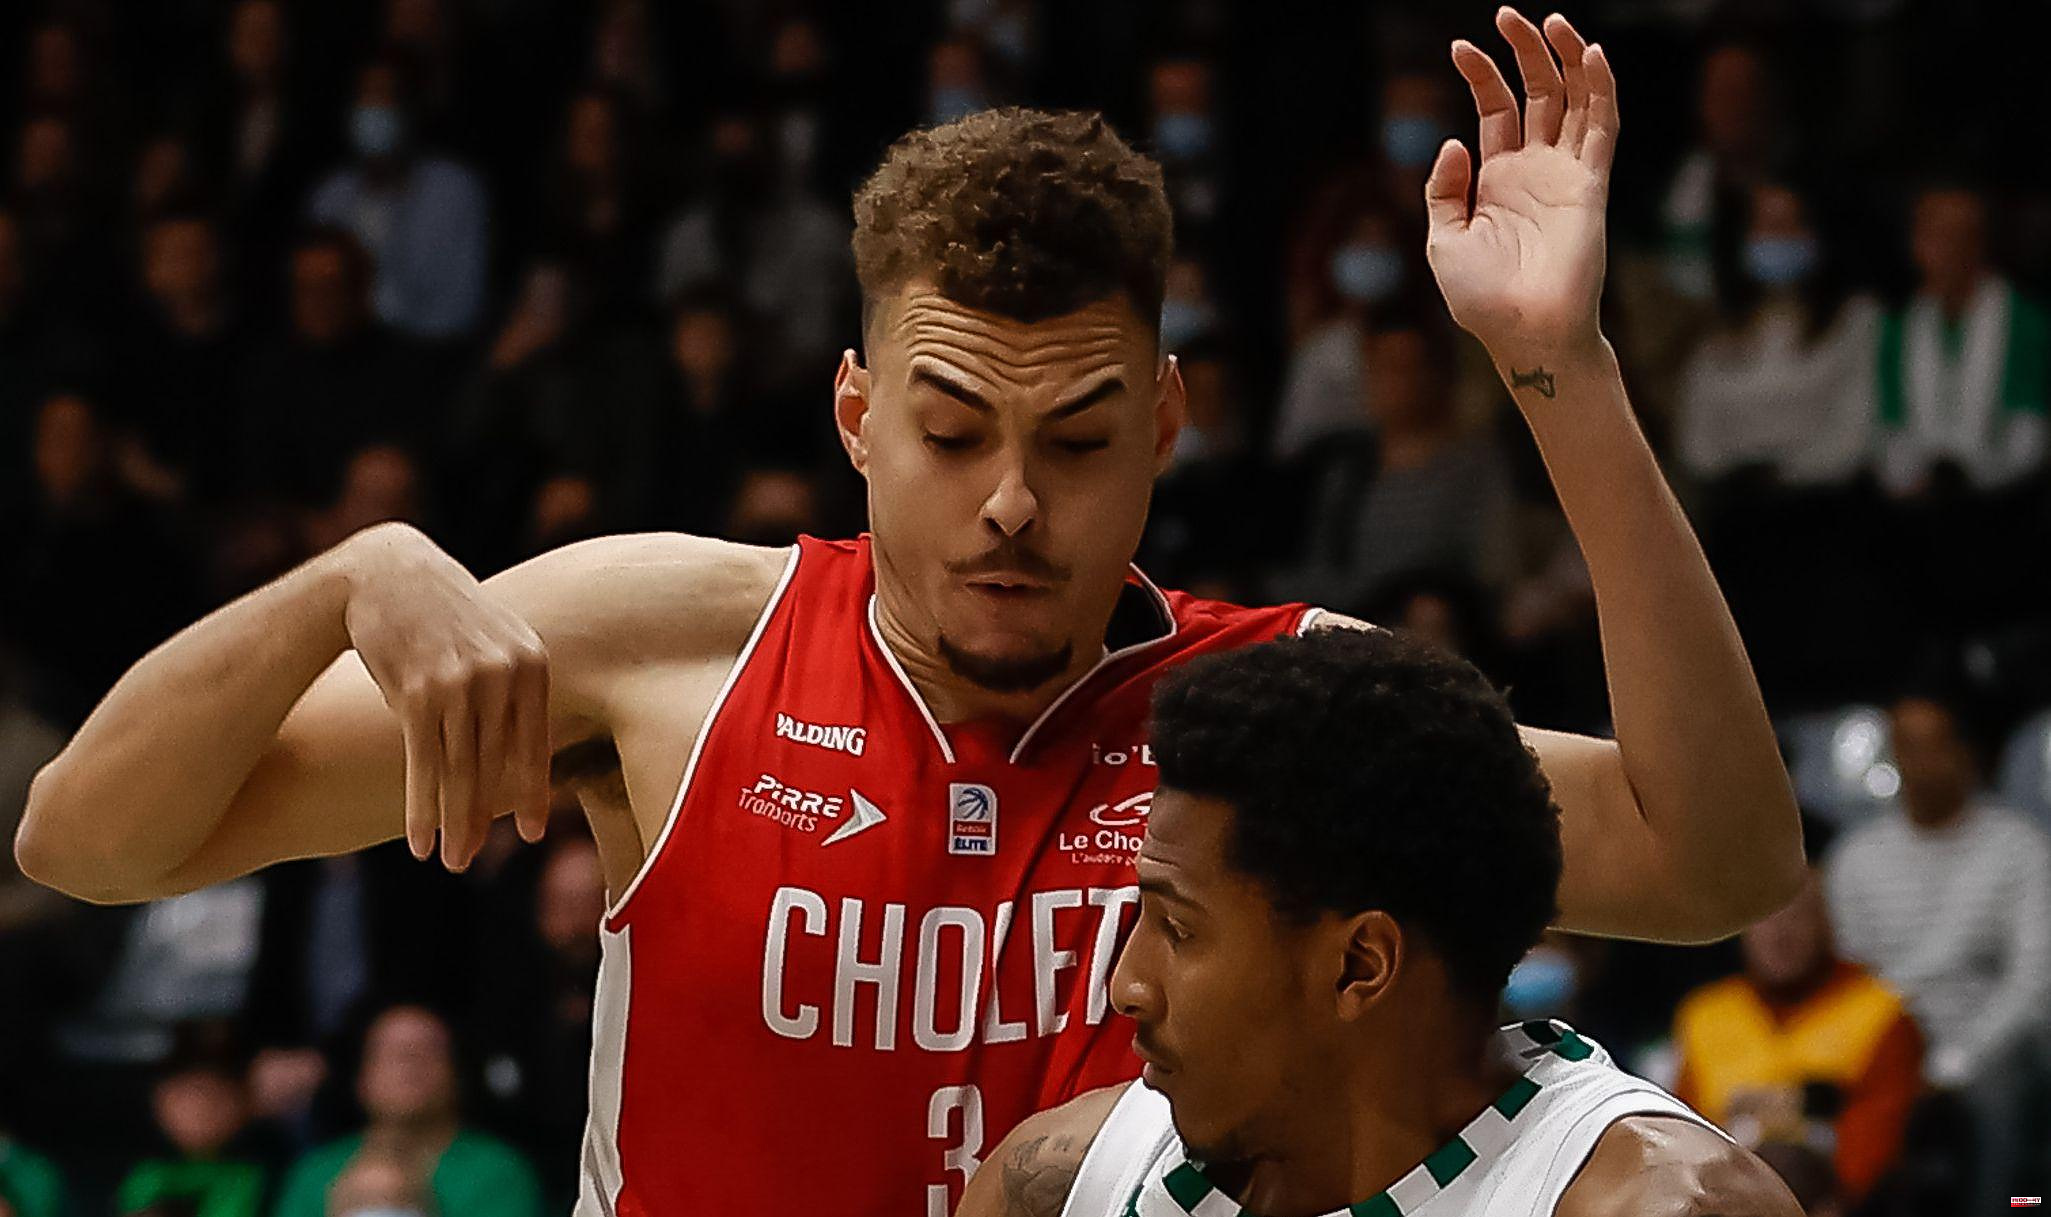 Basketball: Villeurbanne surprised by Cholet as soon as it enters the play-offs